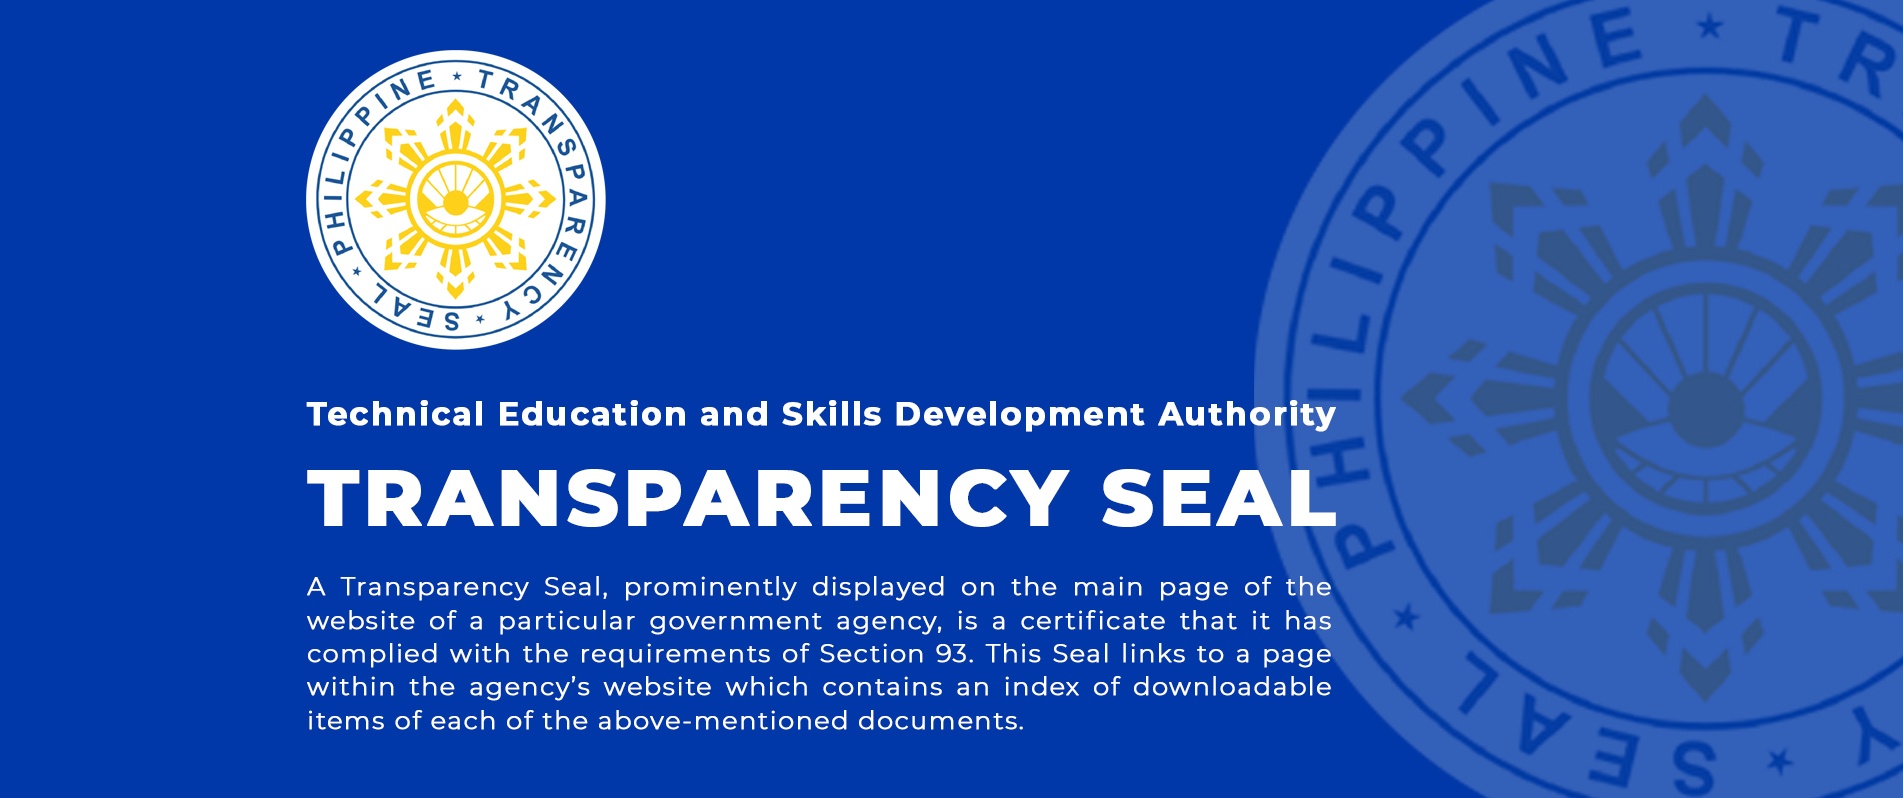 TRANSPARENCY SEAL